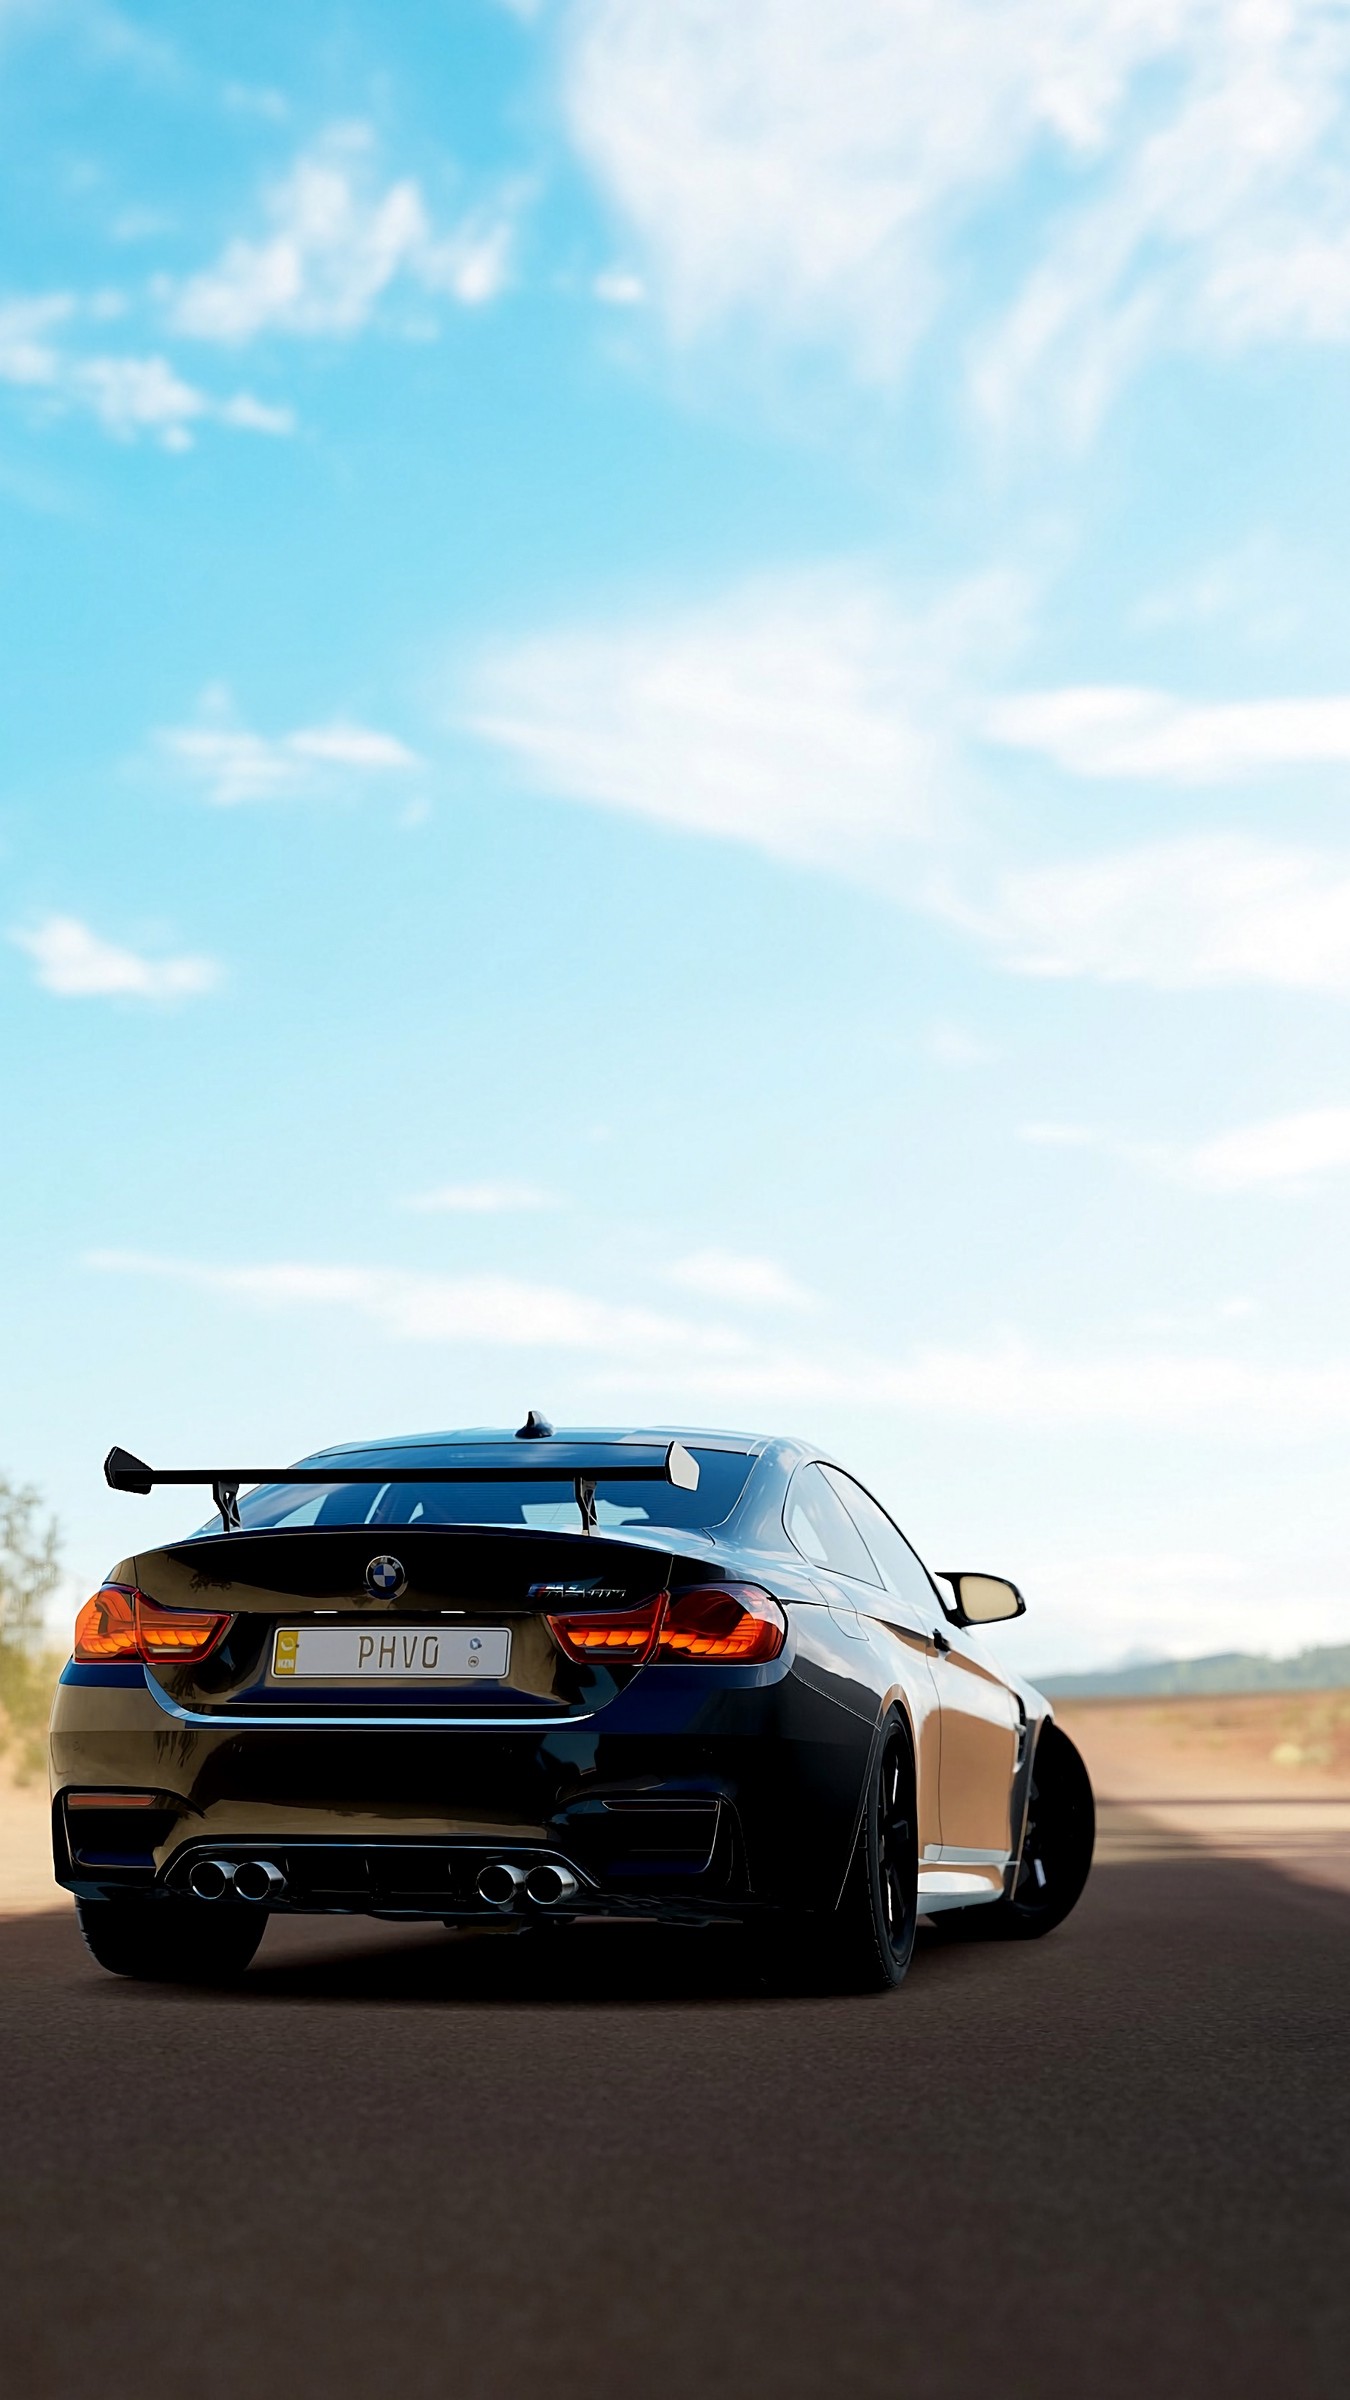 BMW iPhone Wallpaper (88+ images)